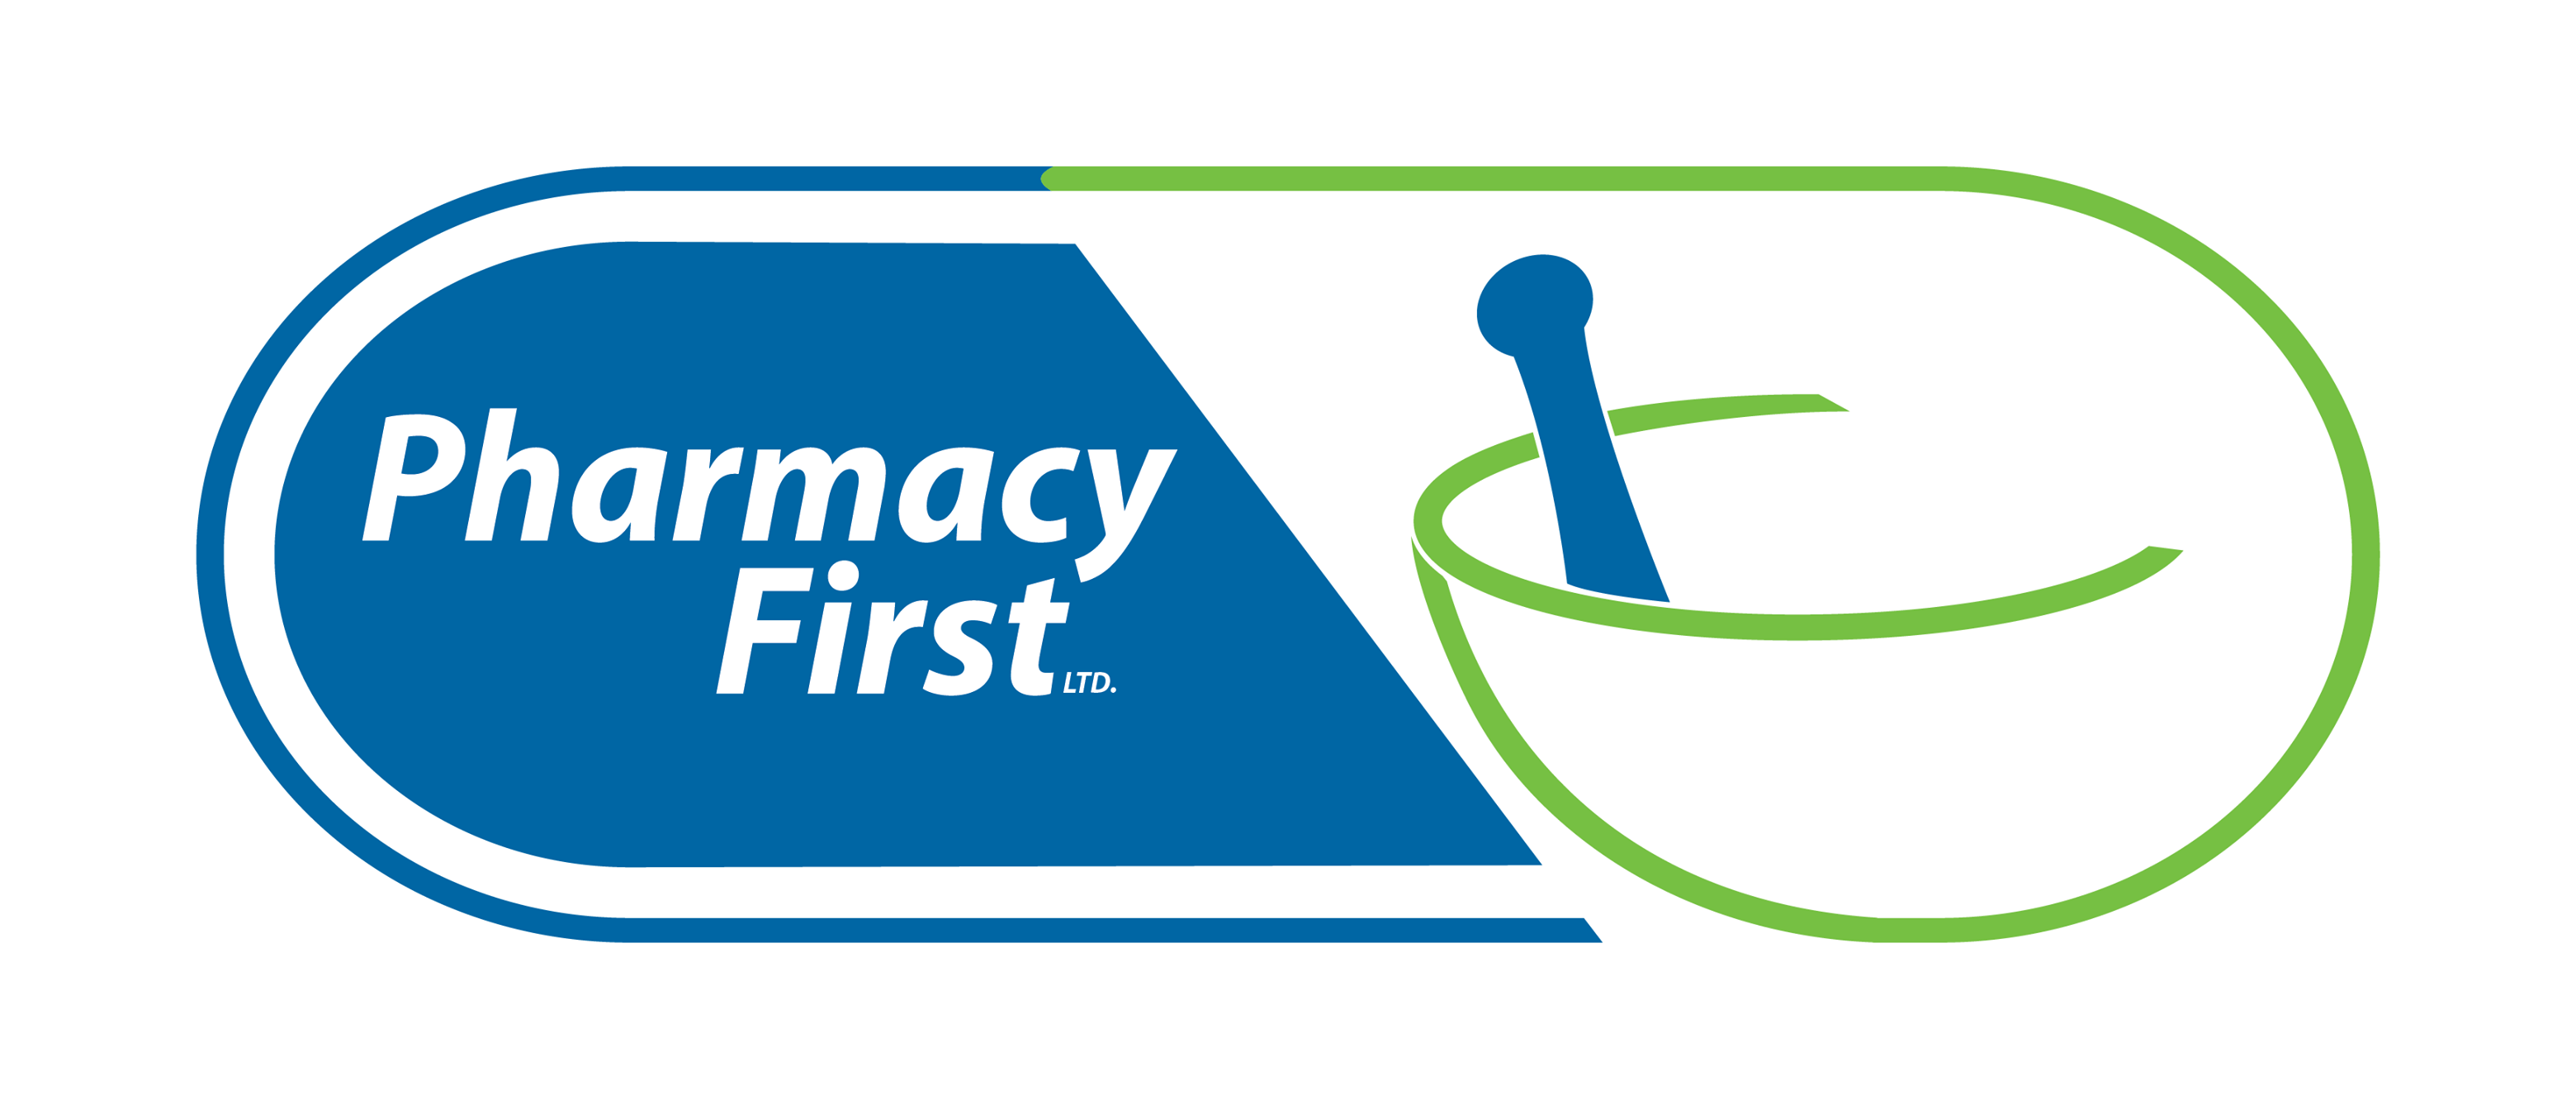 Pharmacy First reviews